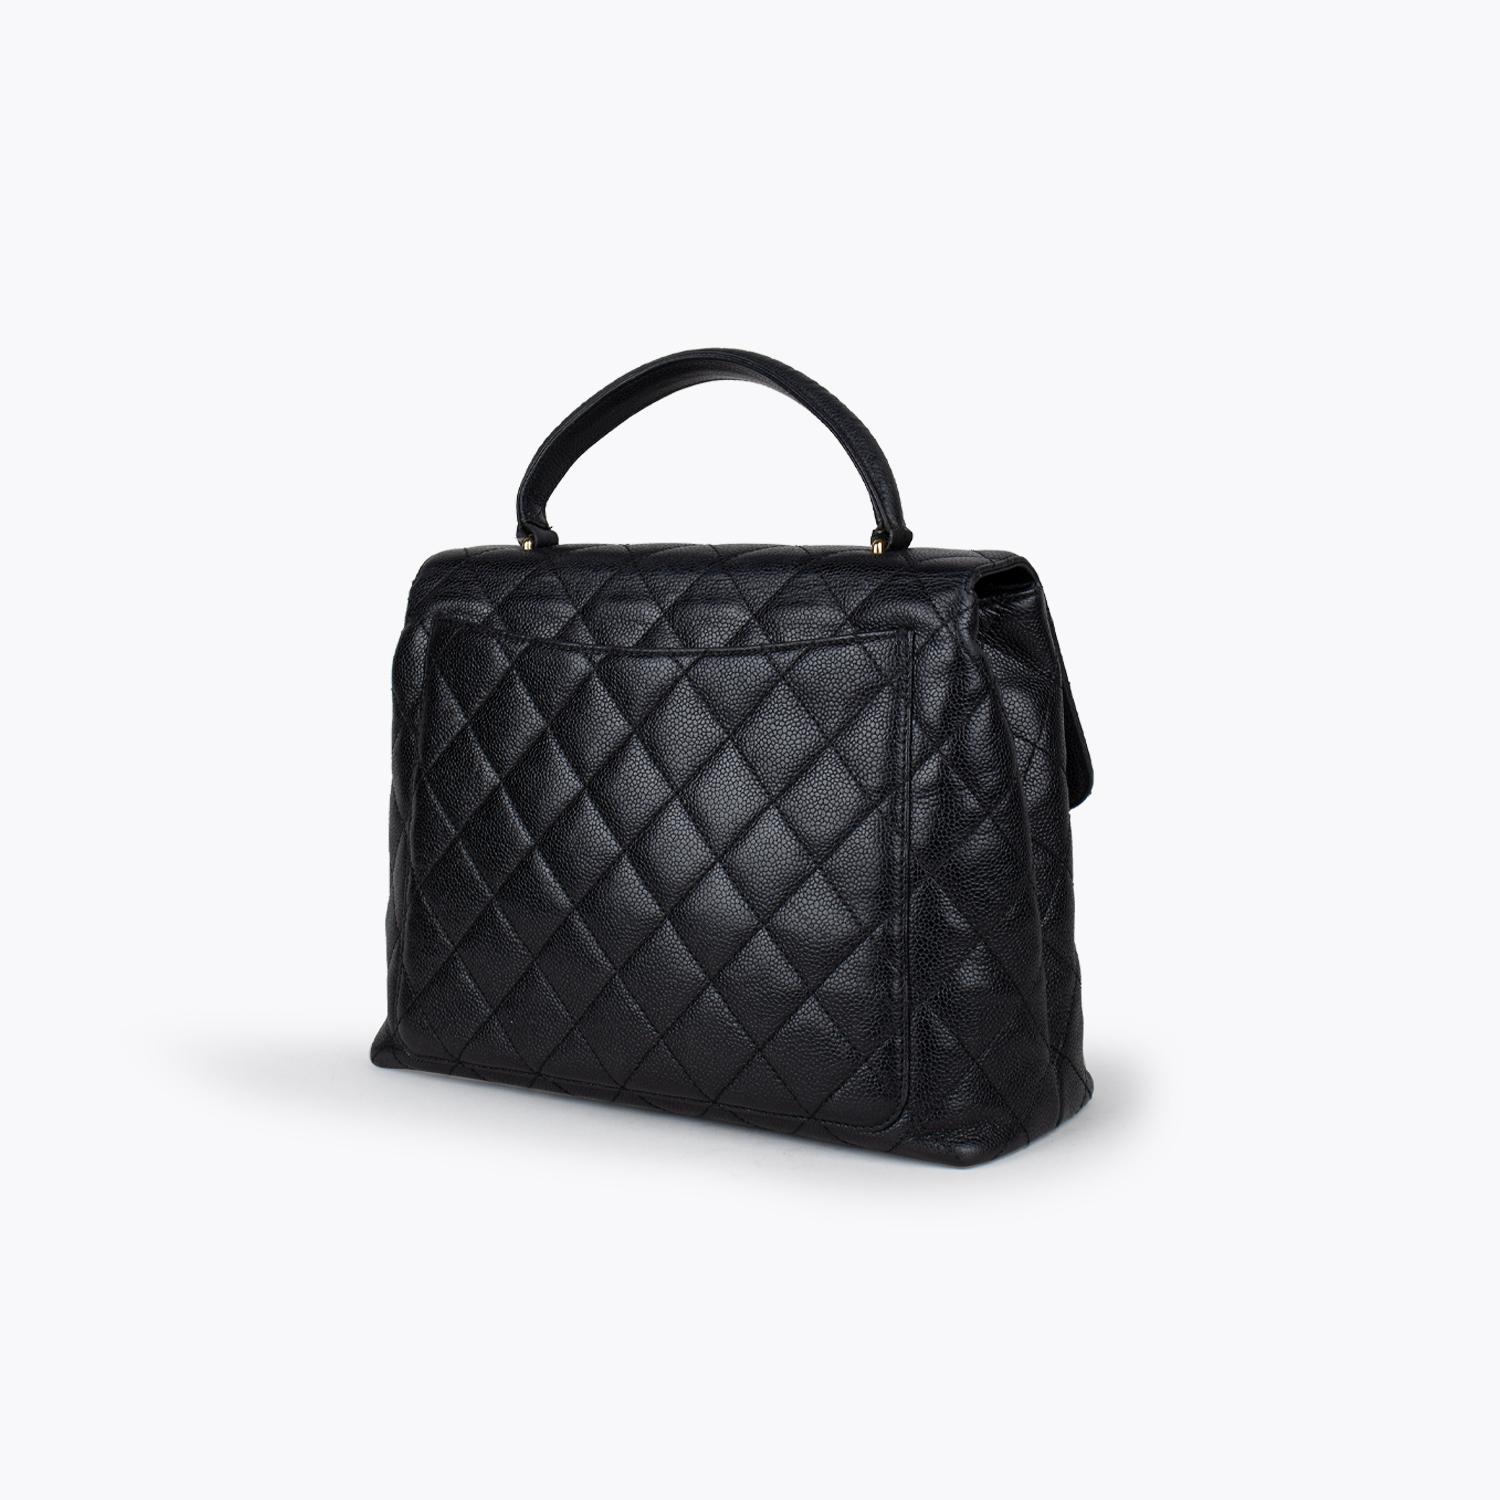 Chanel Caviar Kelly Bag In Good Condition For Sale In Sundbyberg, SE